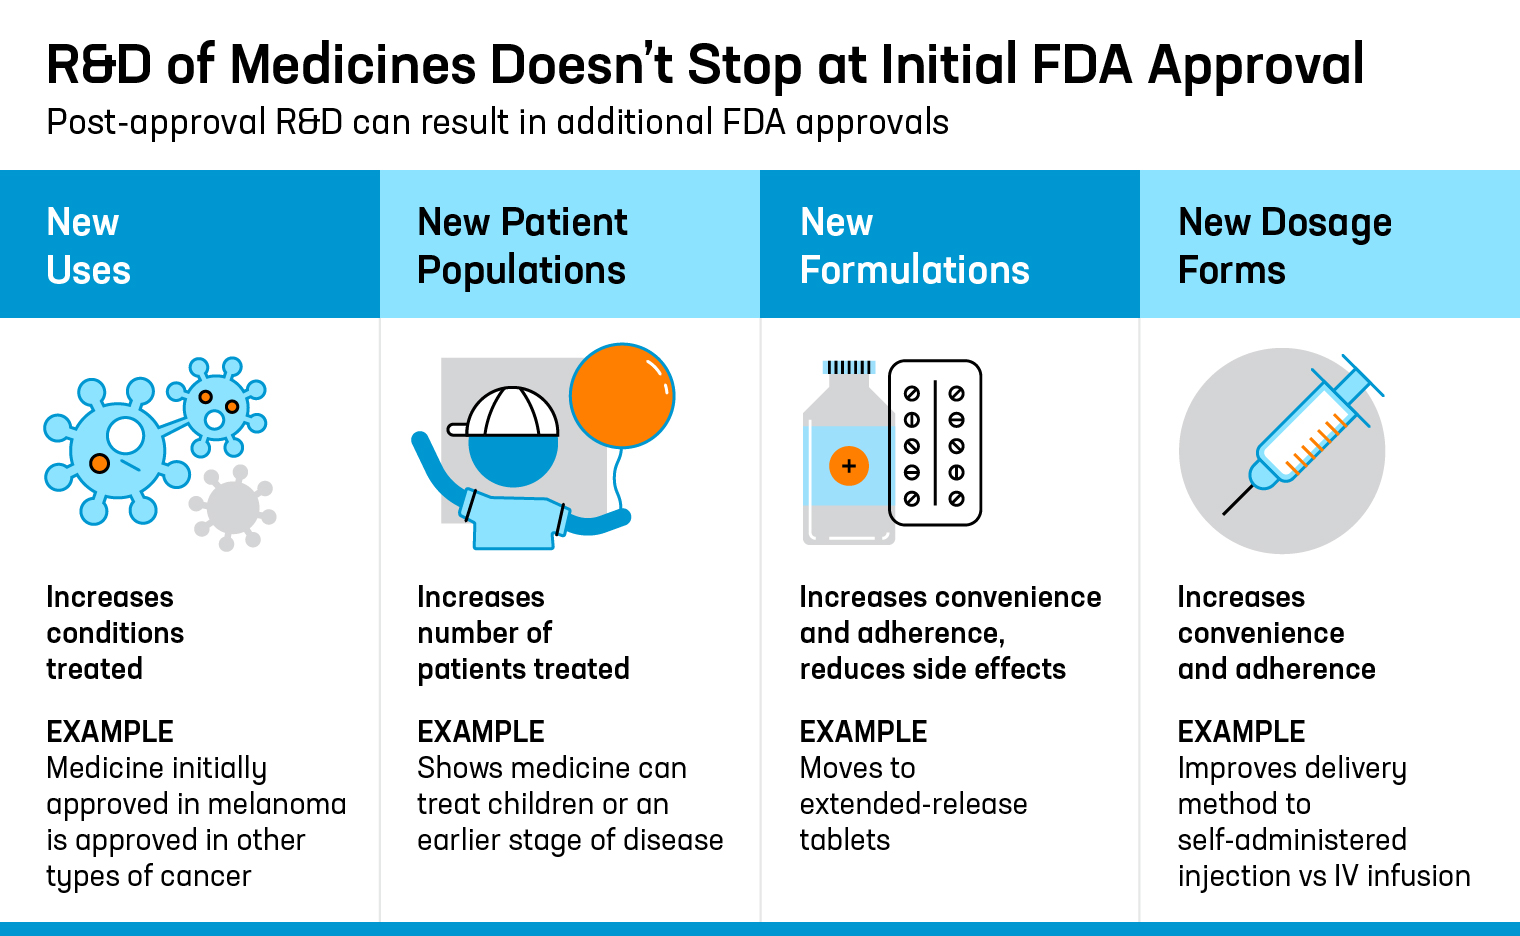 Infographic set up in four columns for each of the four ways R and D doesn't stop at FDA approval, showing new uses, new patient populations, new formulations, and new dosage forms